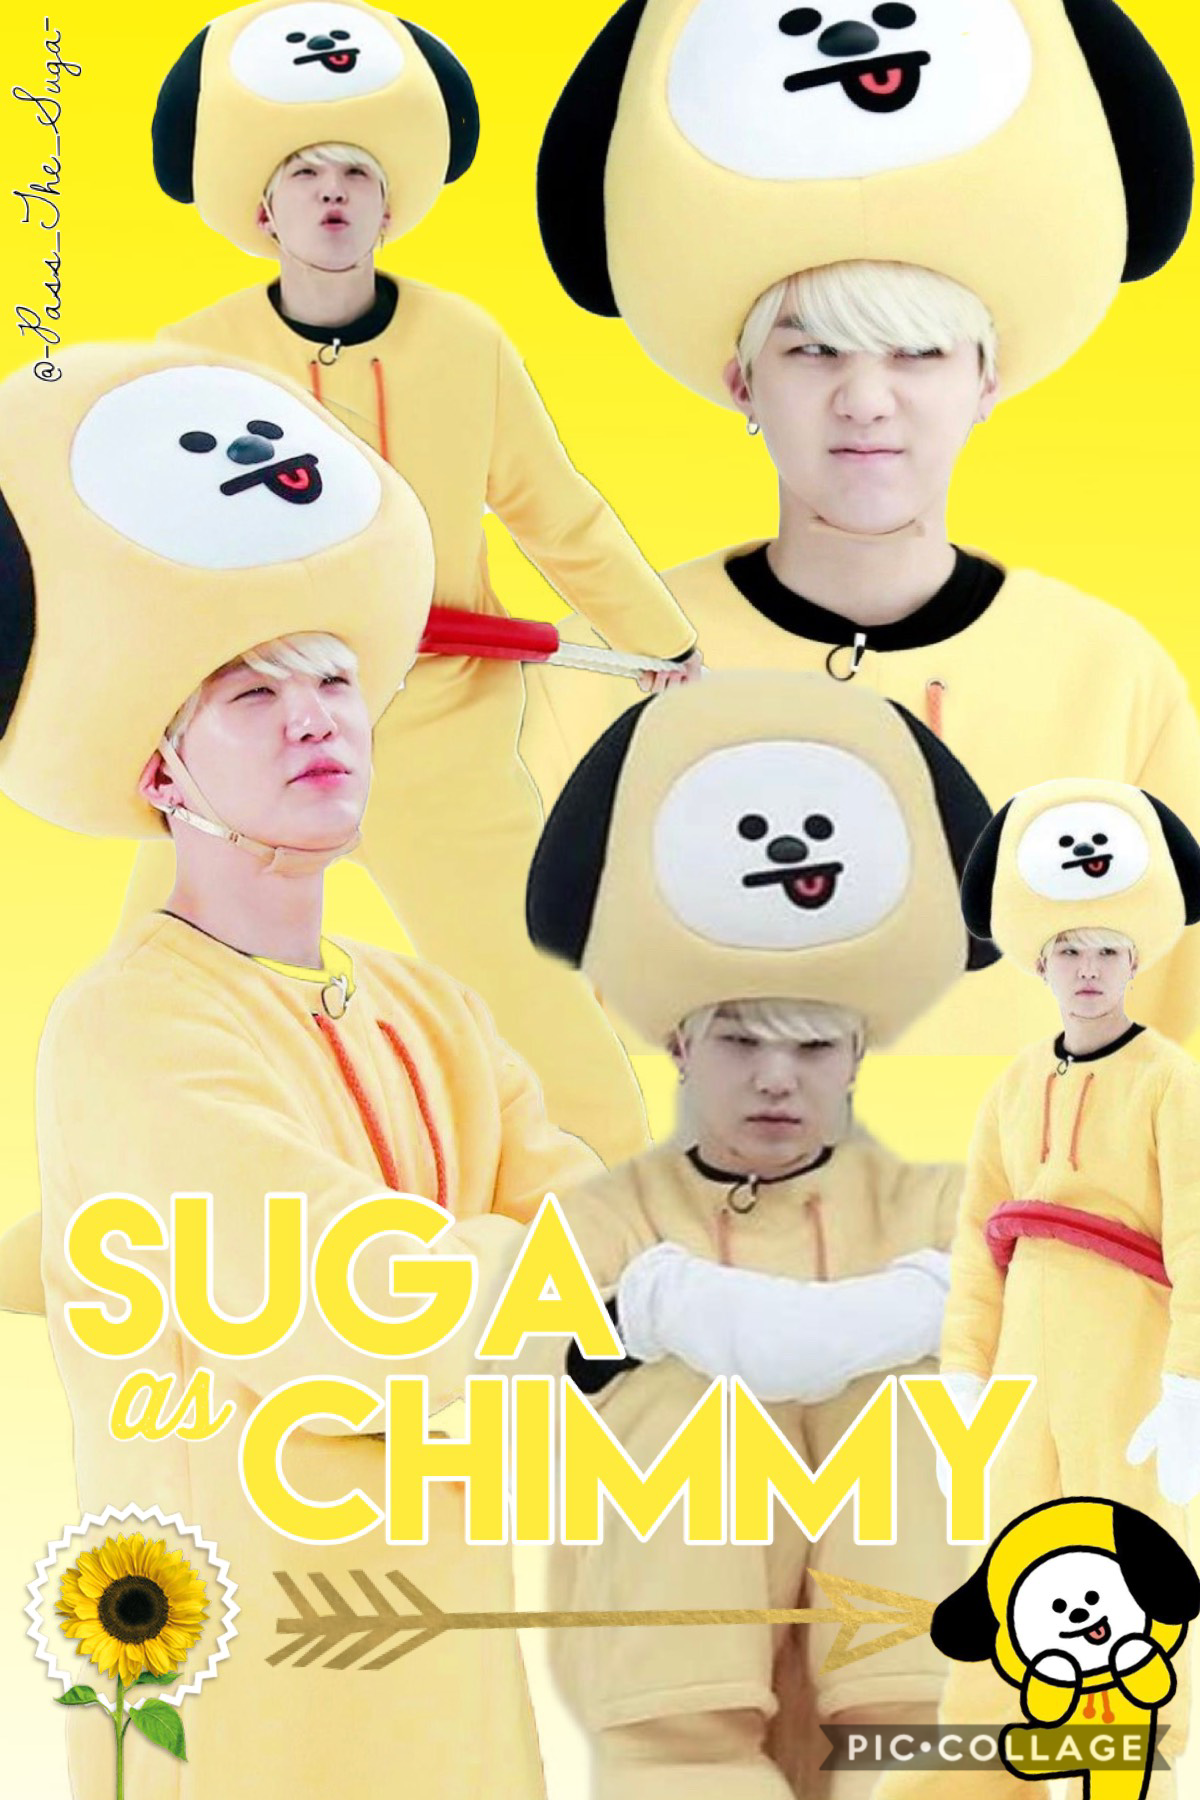 Because he’s too cute in a chimmy costume~ 

Hope you enjoy! 

**ICON CONTEST IS STILL OPEN**